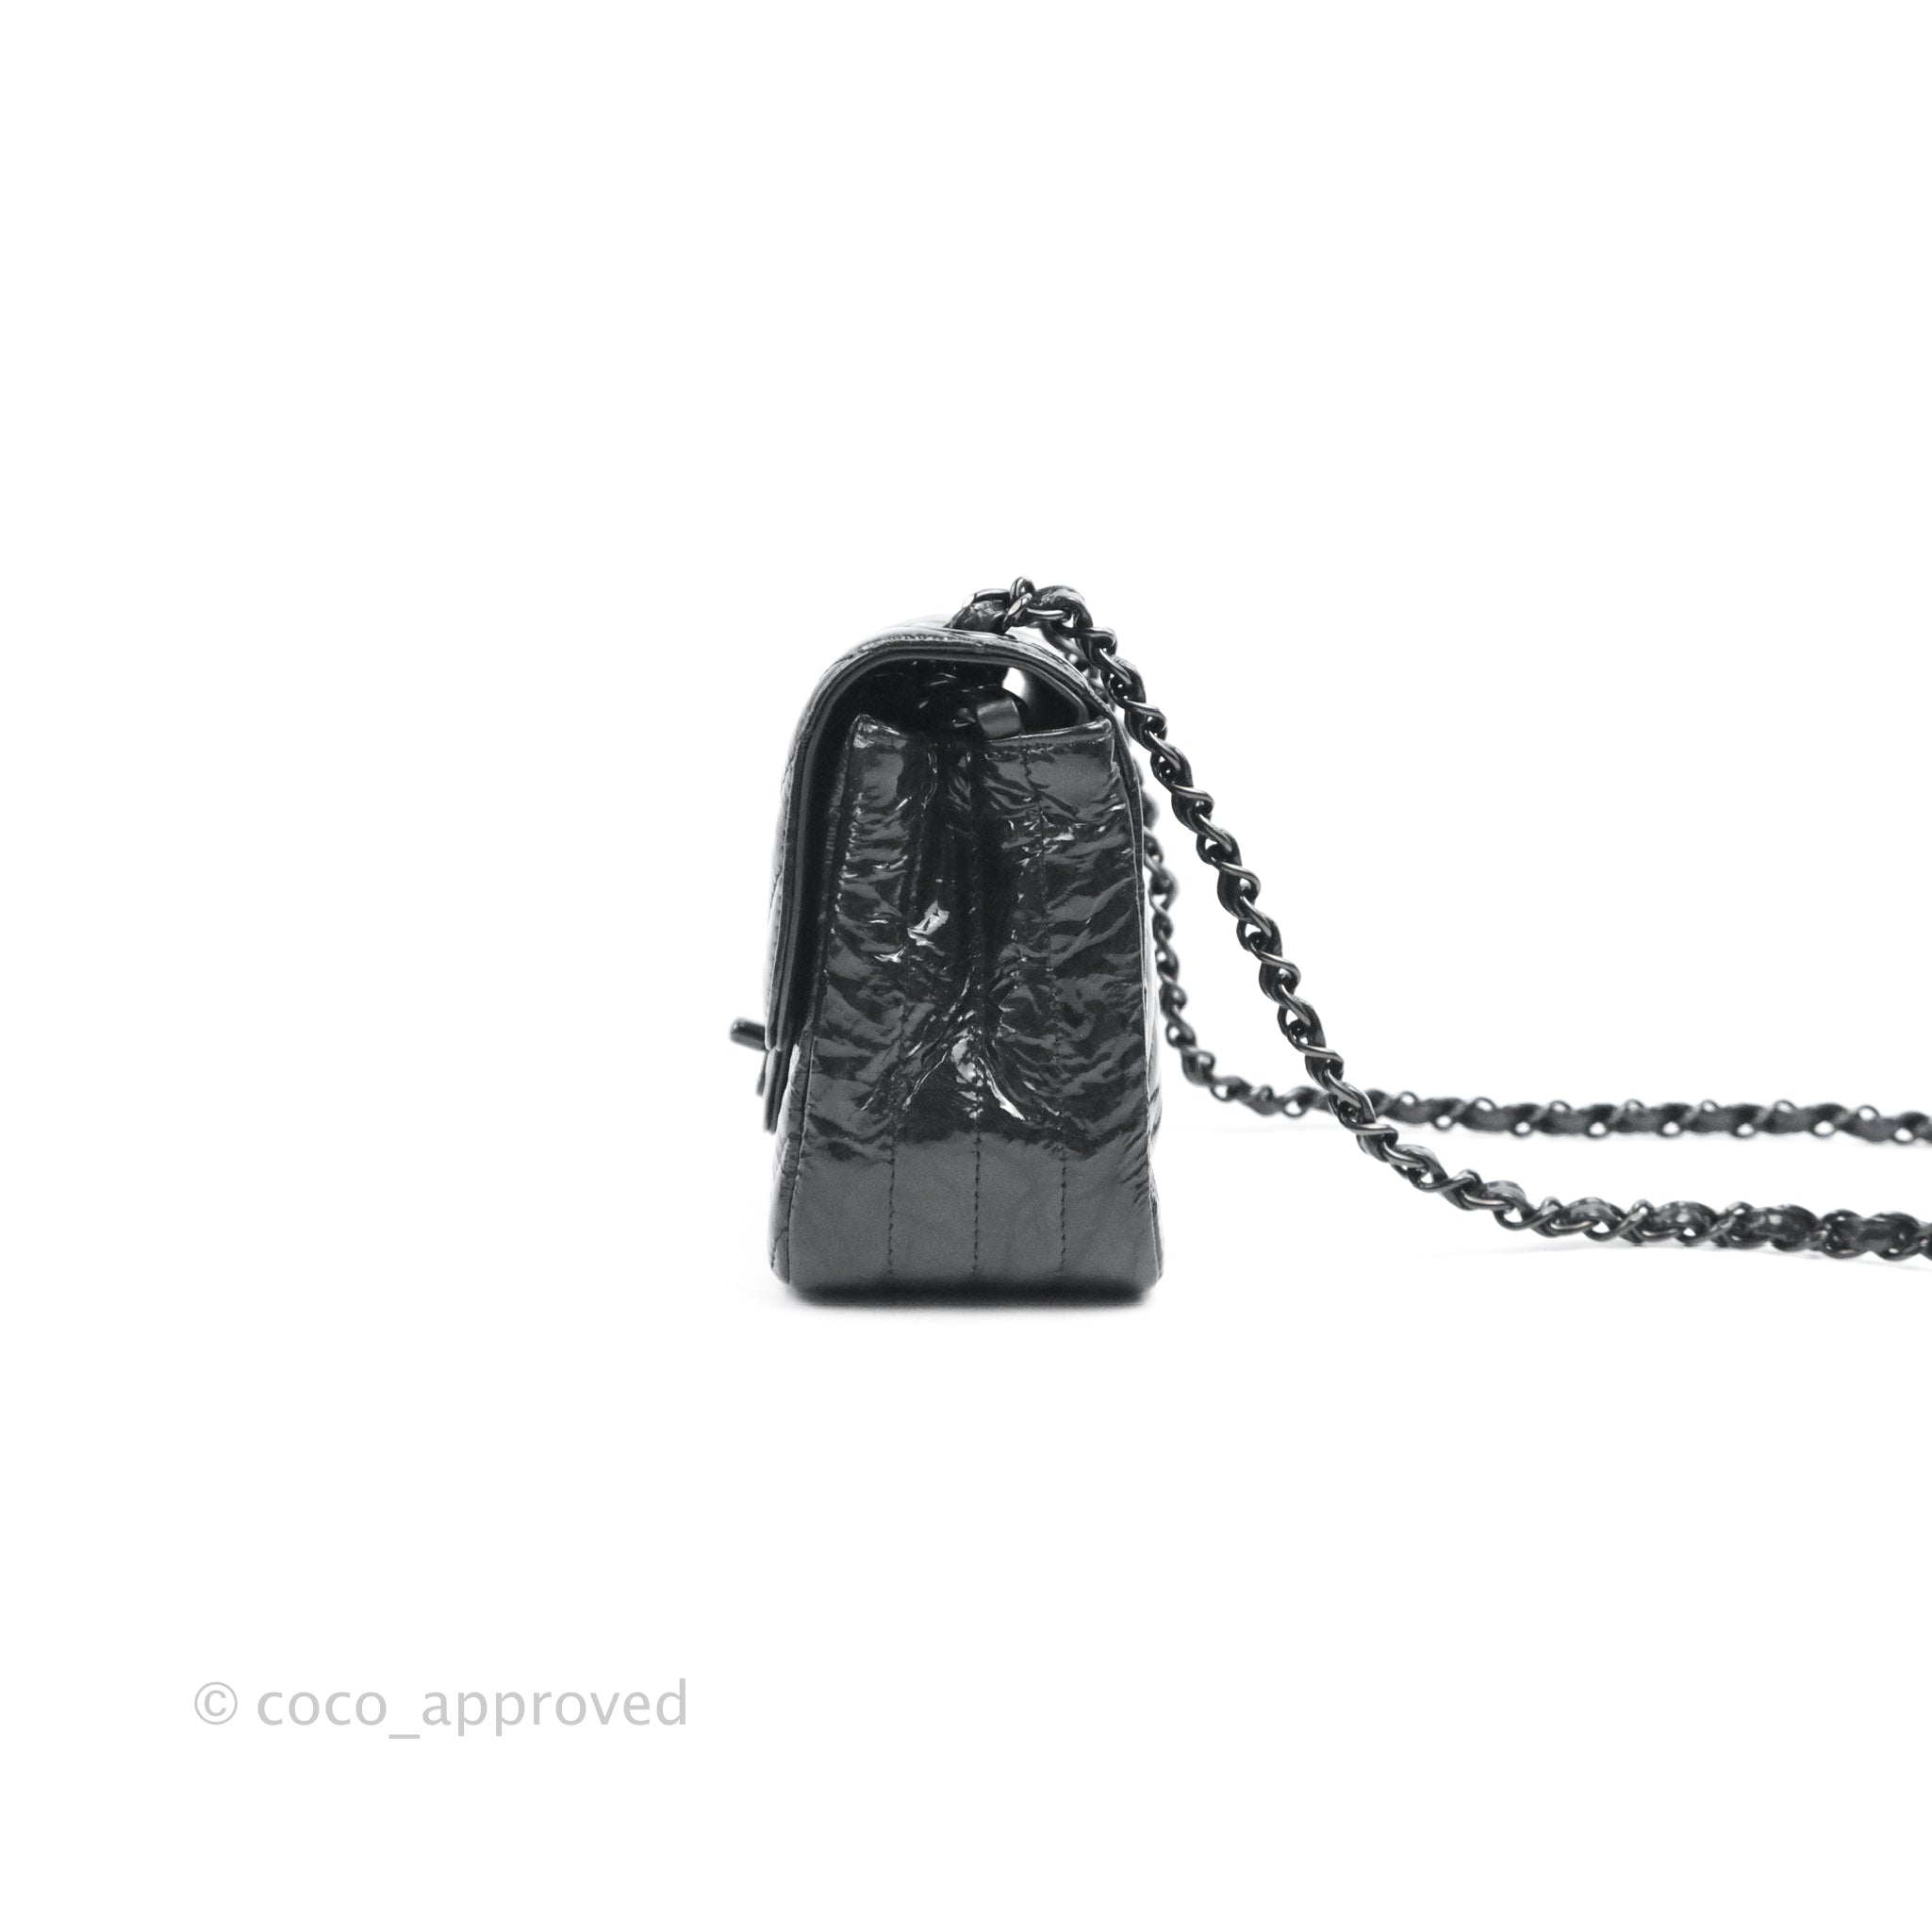 size of chanel classic flap bag small